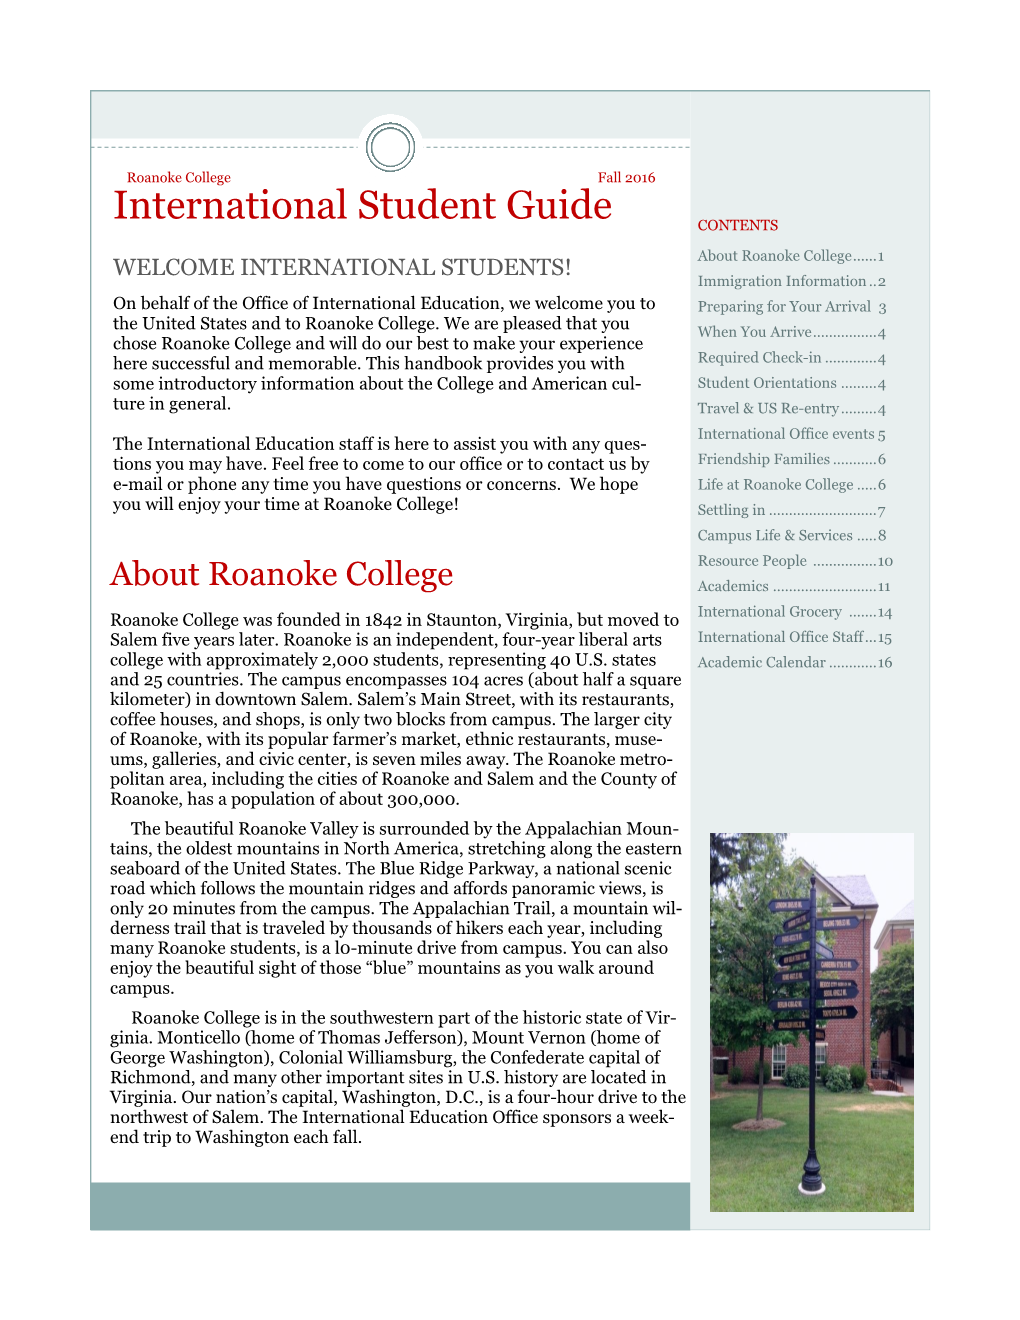 International Student Guide CONTENTS